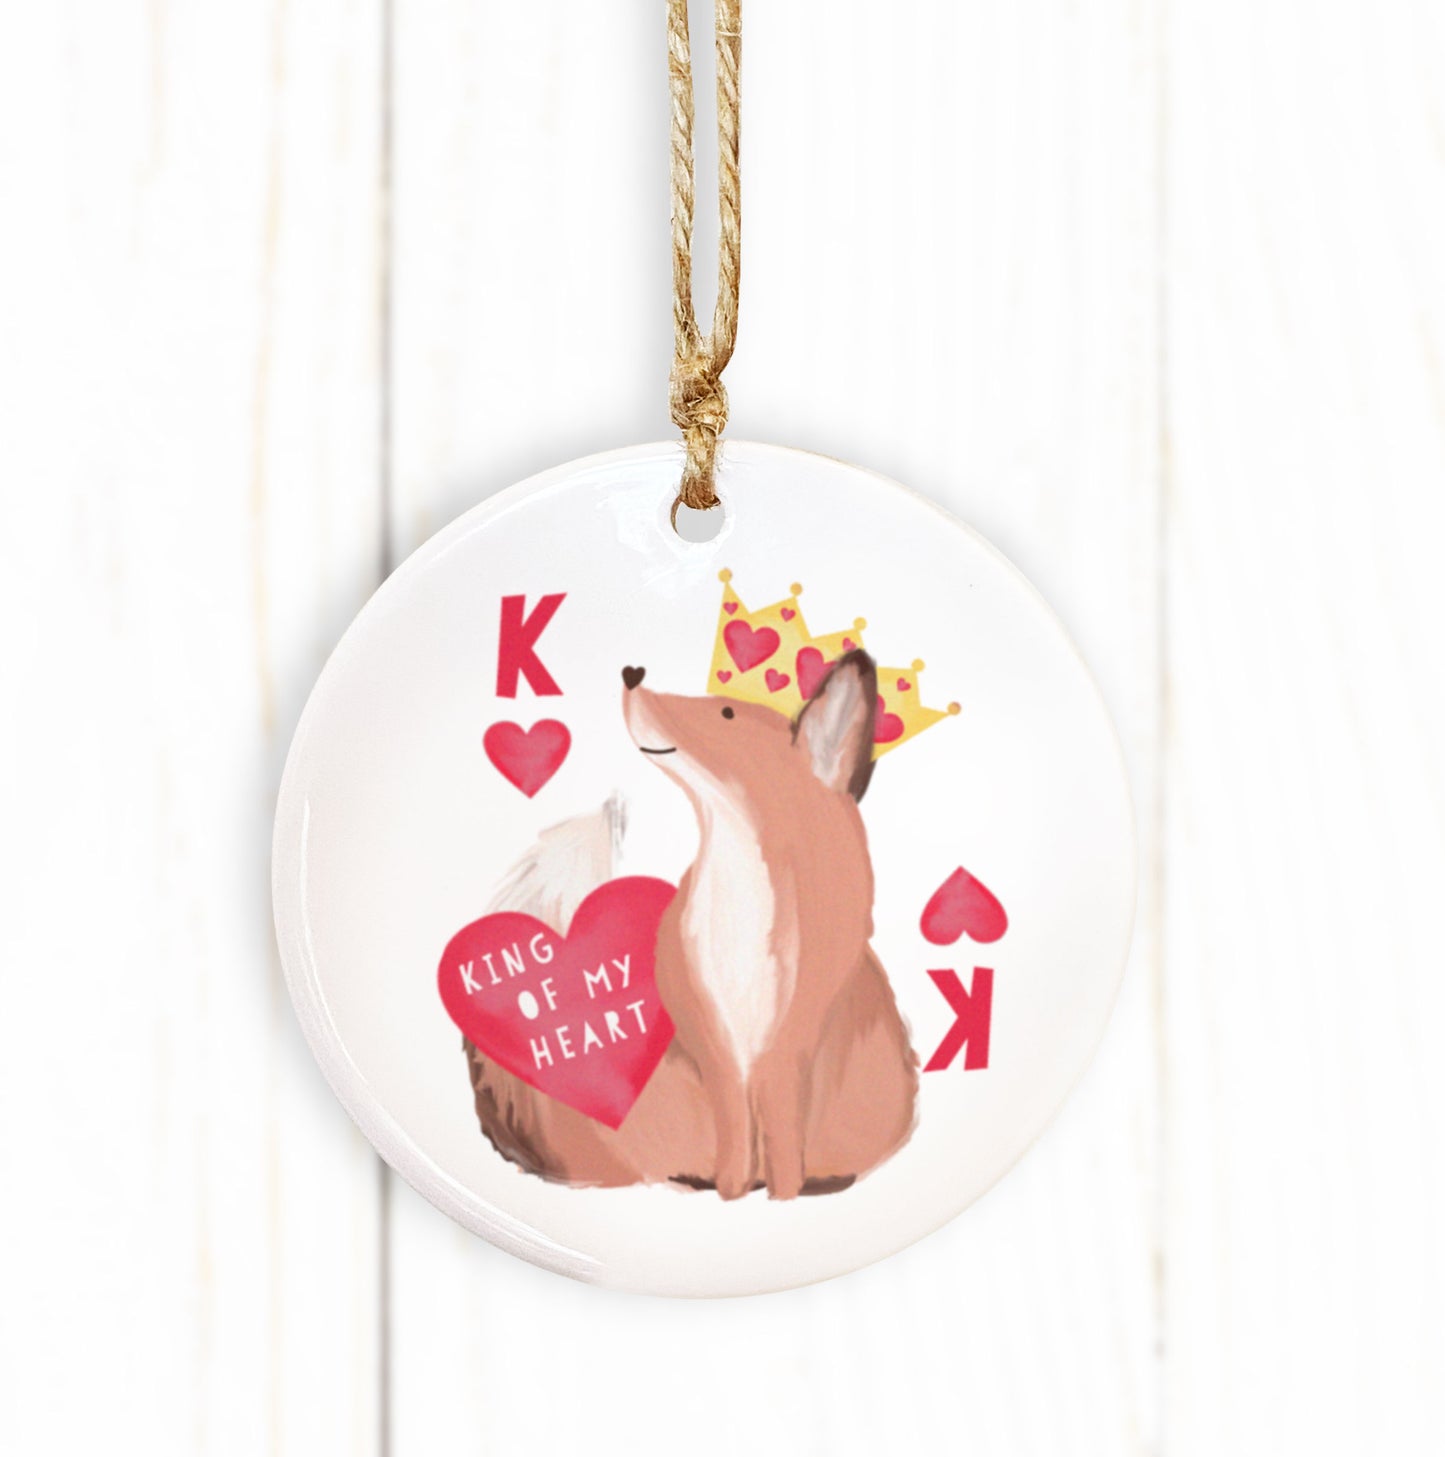 King of My Heart Hanging Round Ceramic Decoration. Cute fox Decoration. Cute Valentine's Day. Ceramic ornament